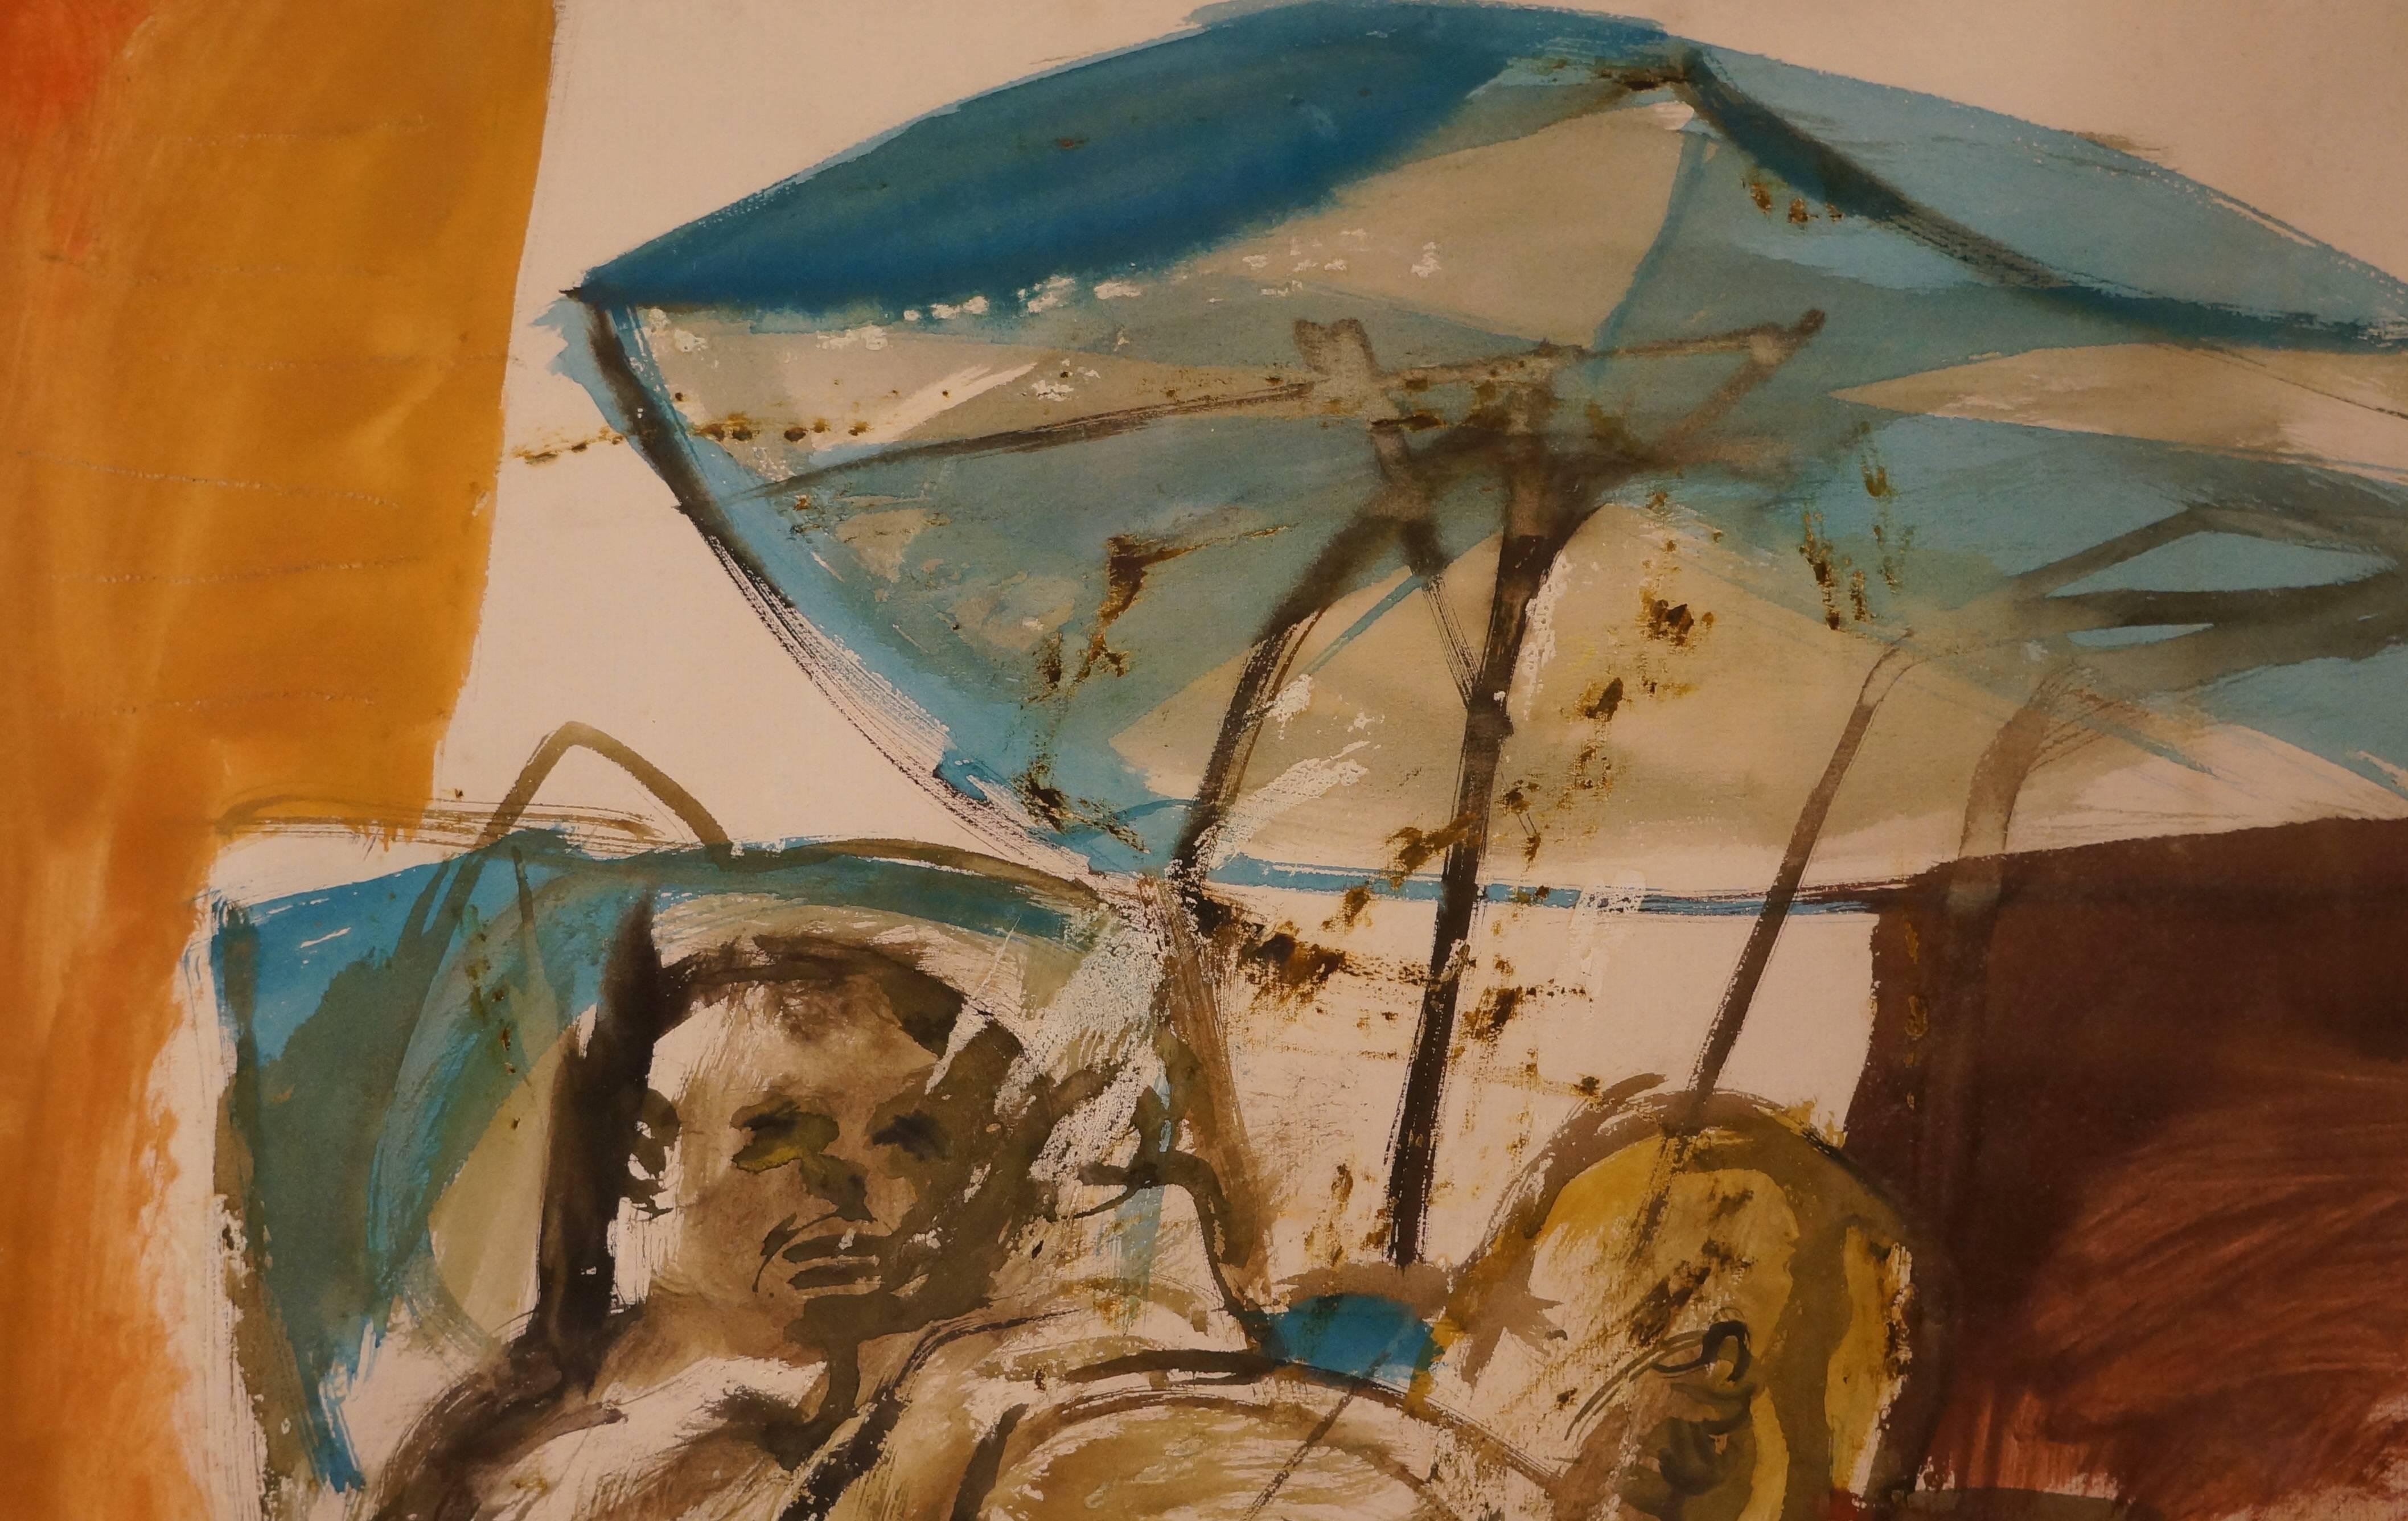 The Baby-stroller - Abstract Painting by Unknown